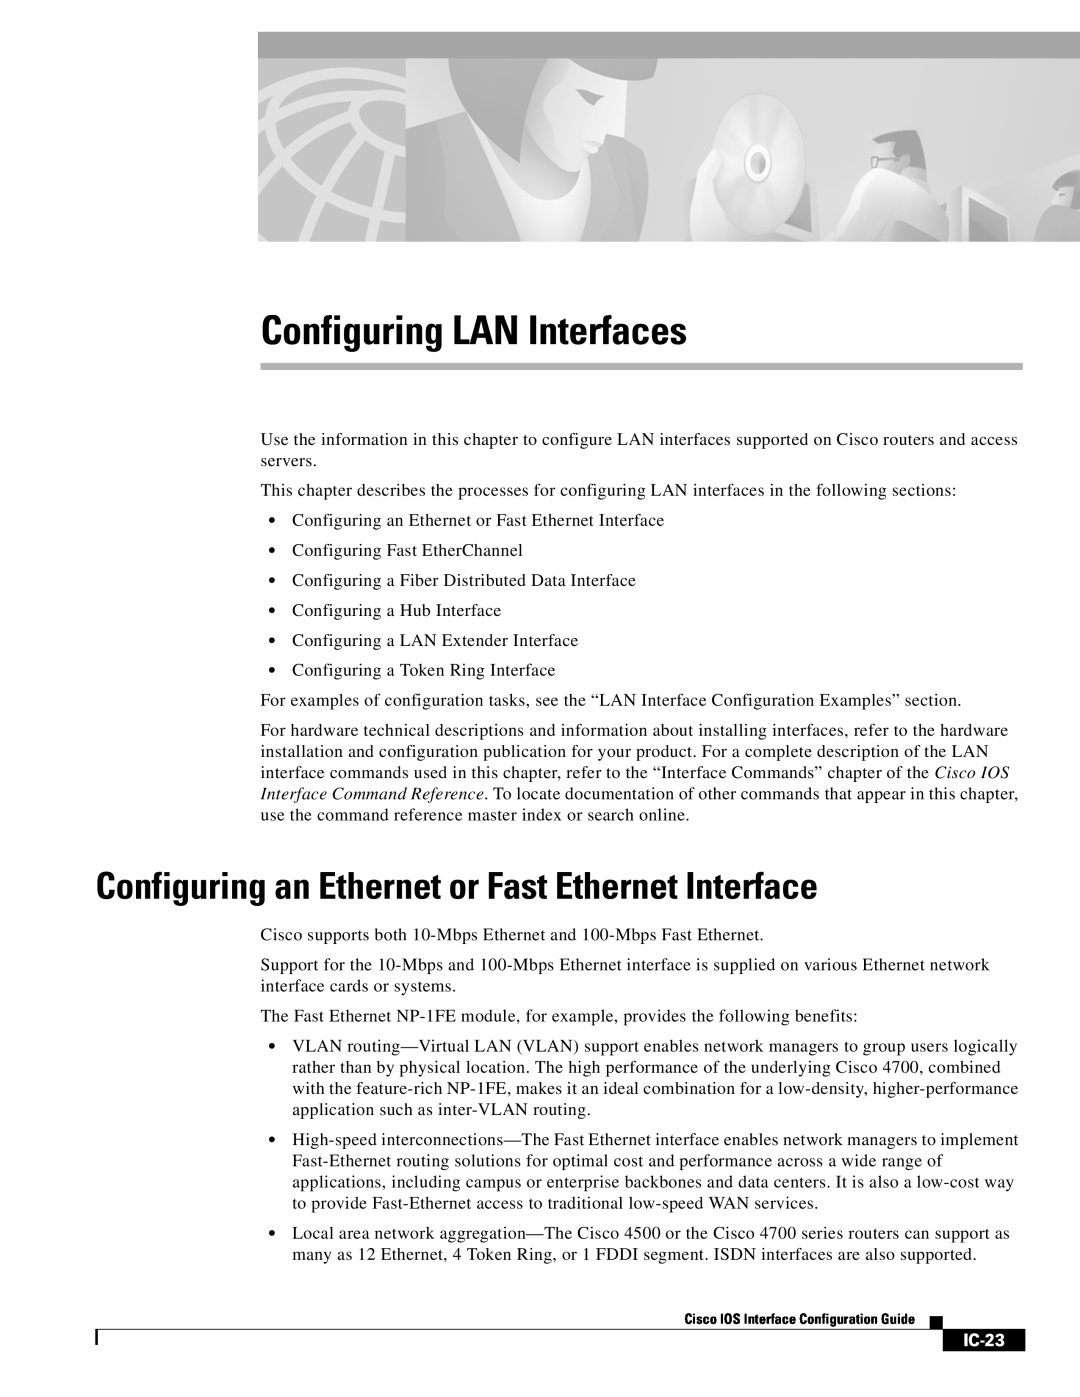 Cisco Systems IC-23 manual Configuring an Ethernet or Fast Ethernet Interface, Configuring LAN Interfaces 